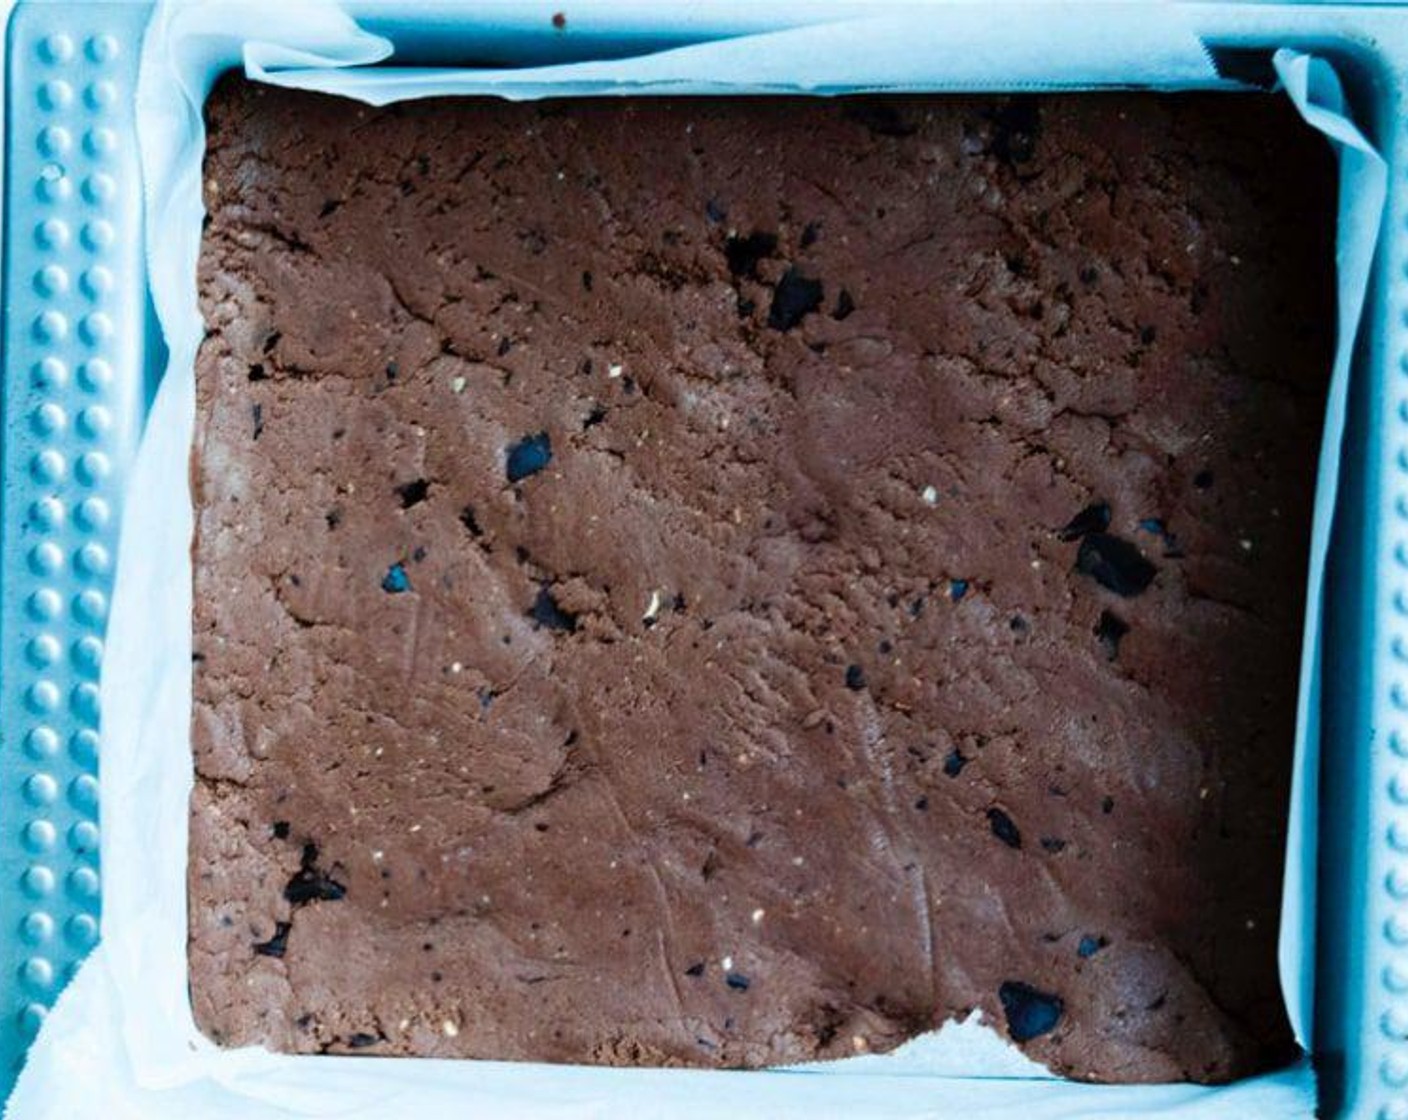 step 3 Spread it into a baking tray layered with parchment paper and refrigerate overnight or for 8 hours.